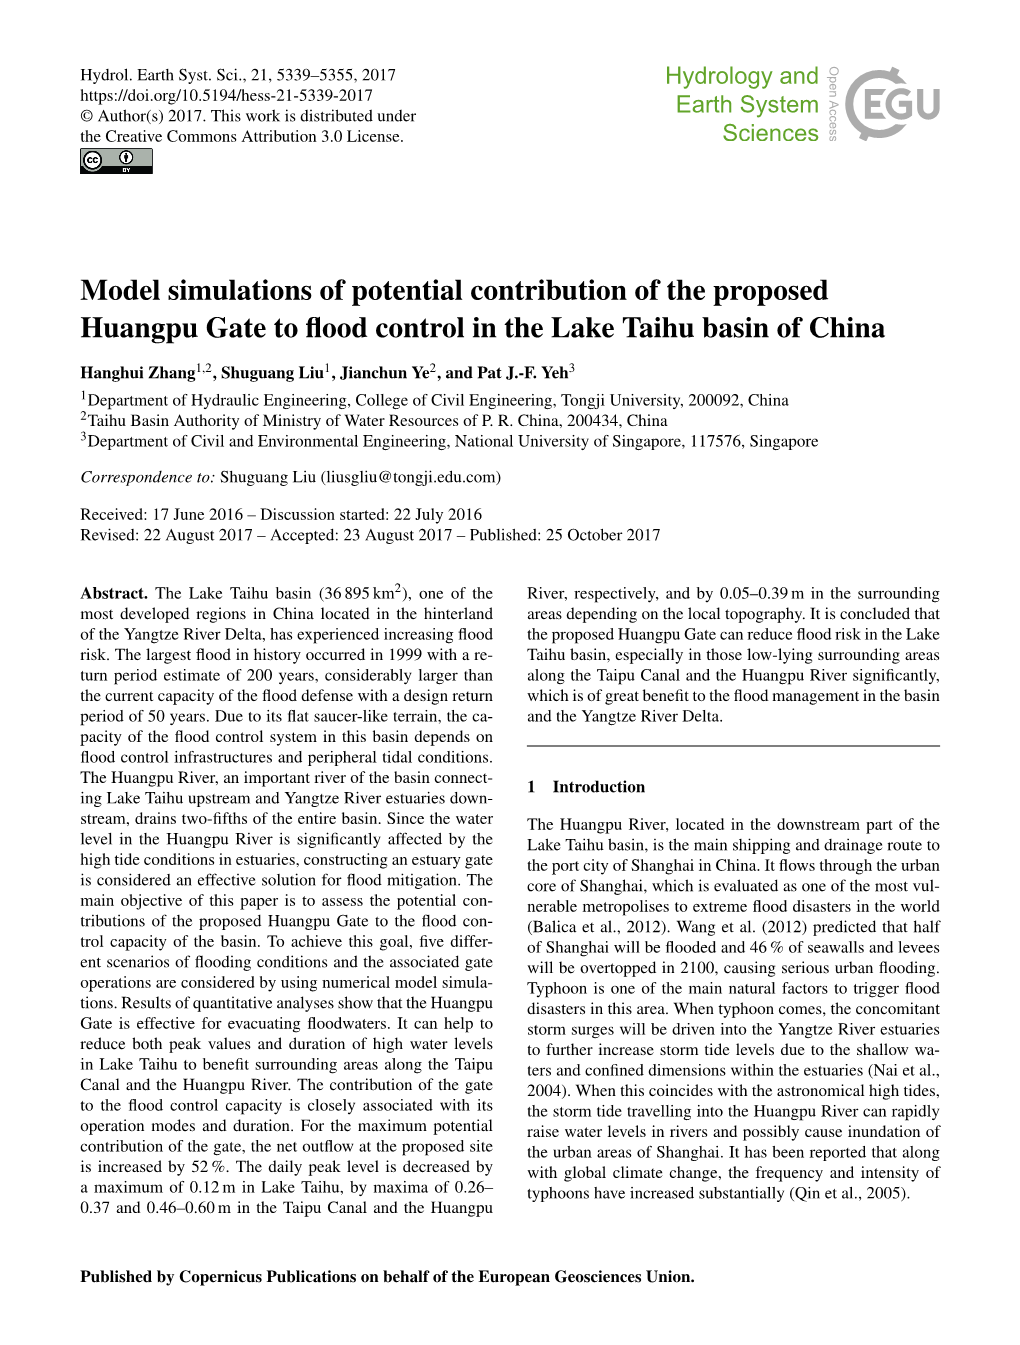 Model Simulations of Potential Contribution of the Proposed Huangpu Gate to ﬂood Control in the Lake Taihu Basin of China